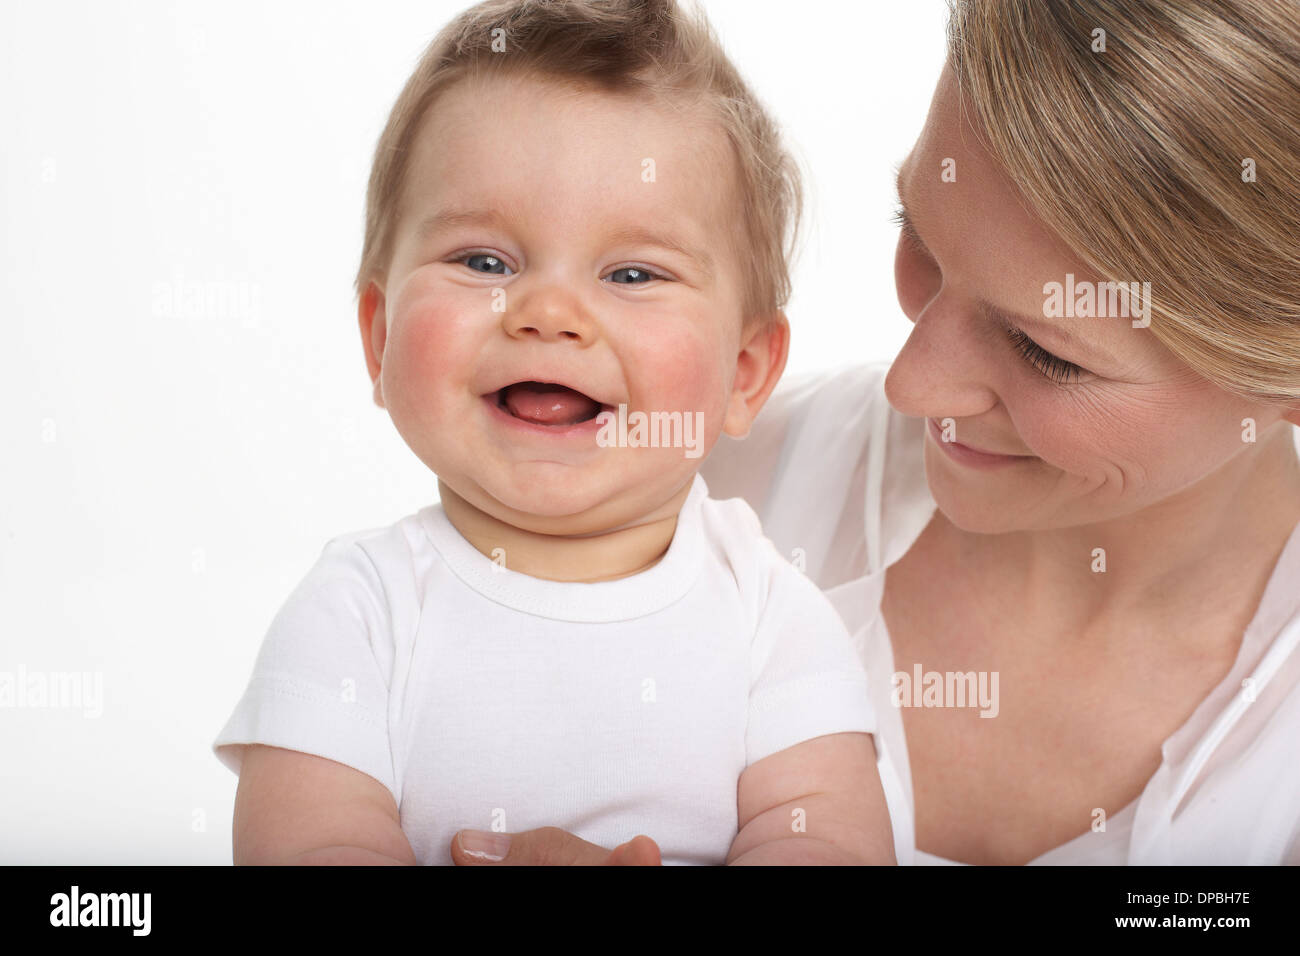 Smiling baby boy and his mother Stock Photo